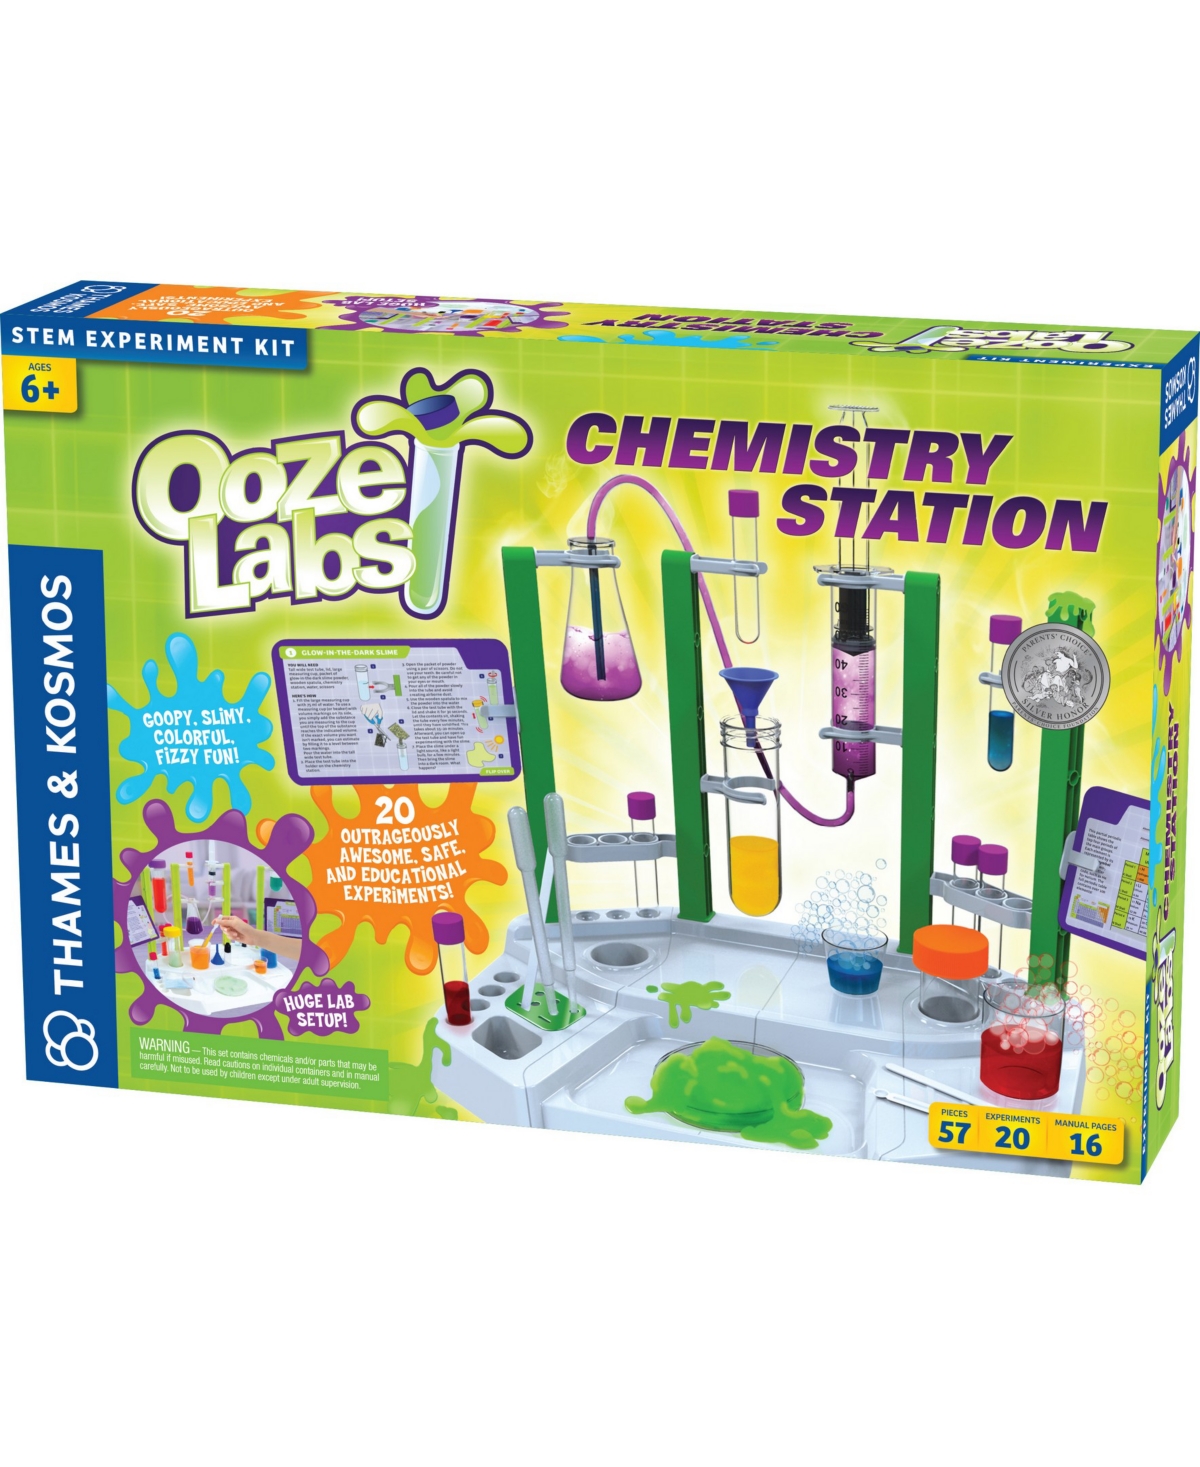 Thames & Kosmos Ooze Labs Chemistry Station In Multi